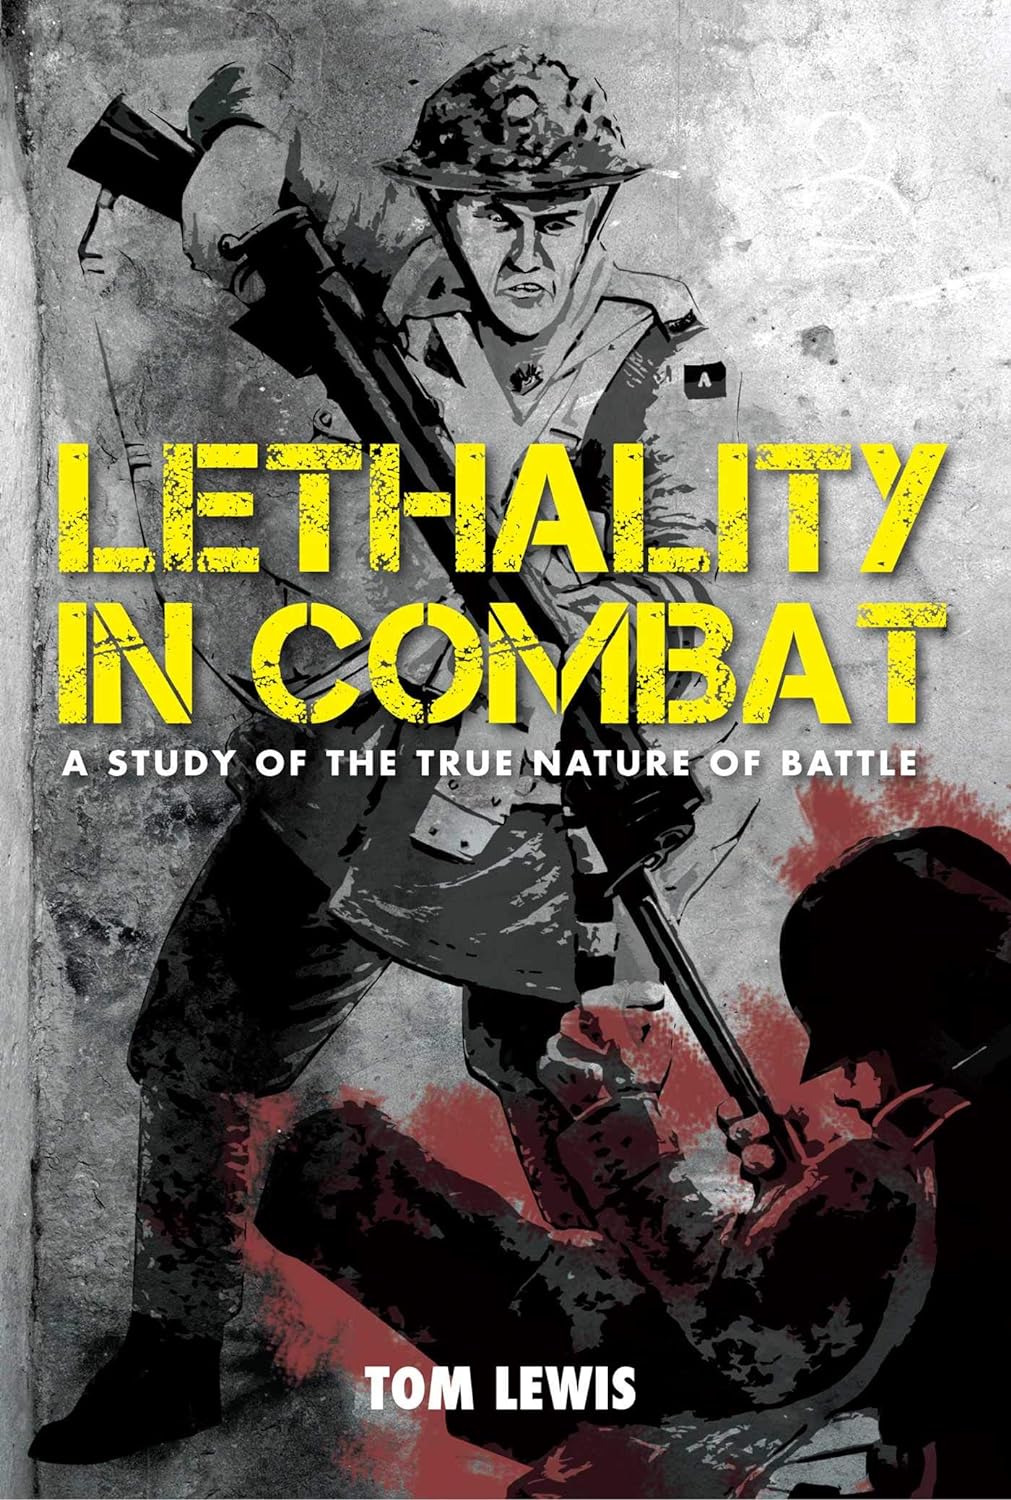 Lethality In Combat: A Study of the True Nature of Battle